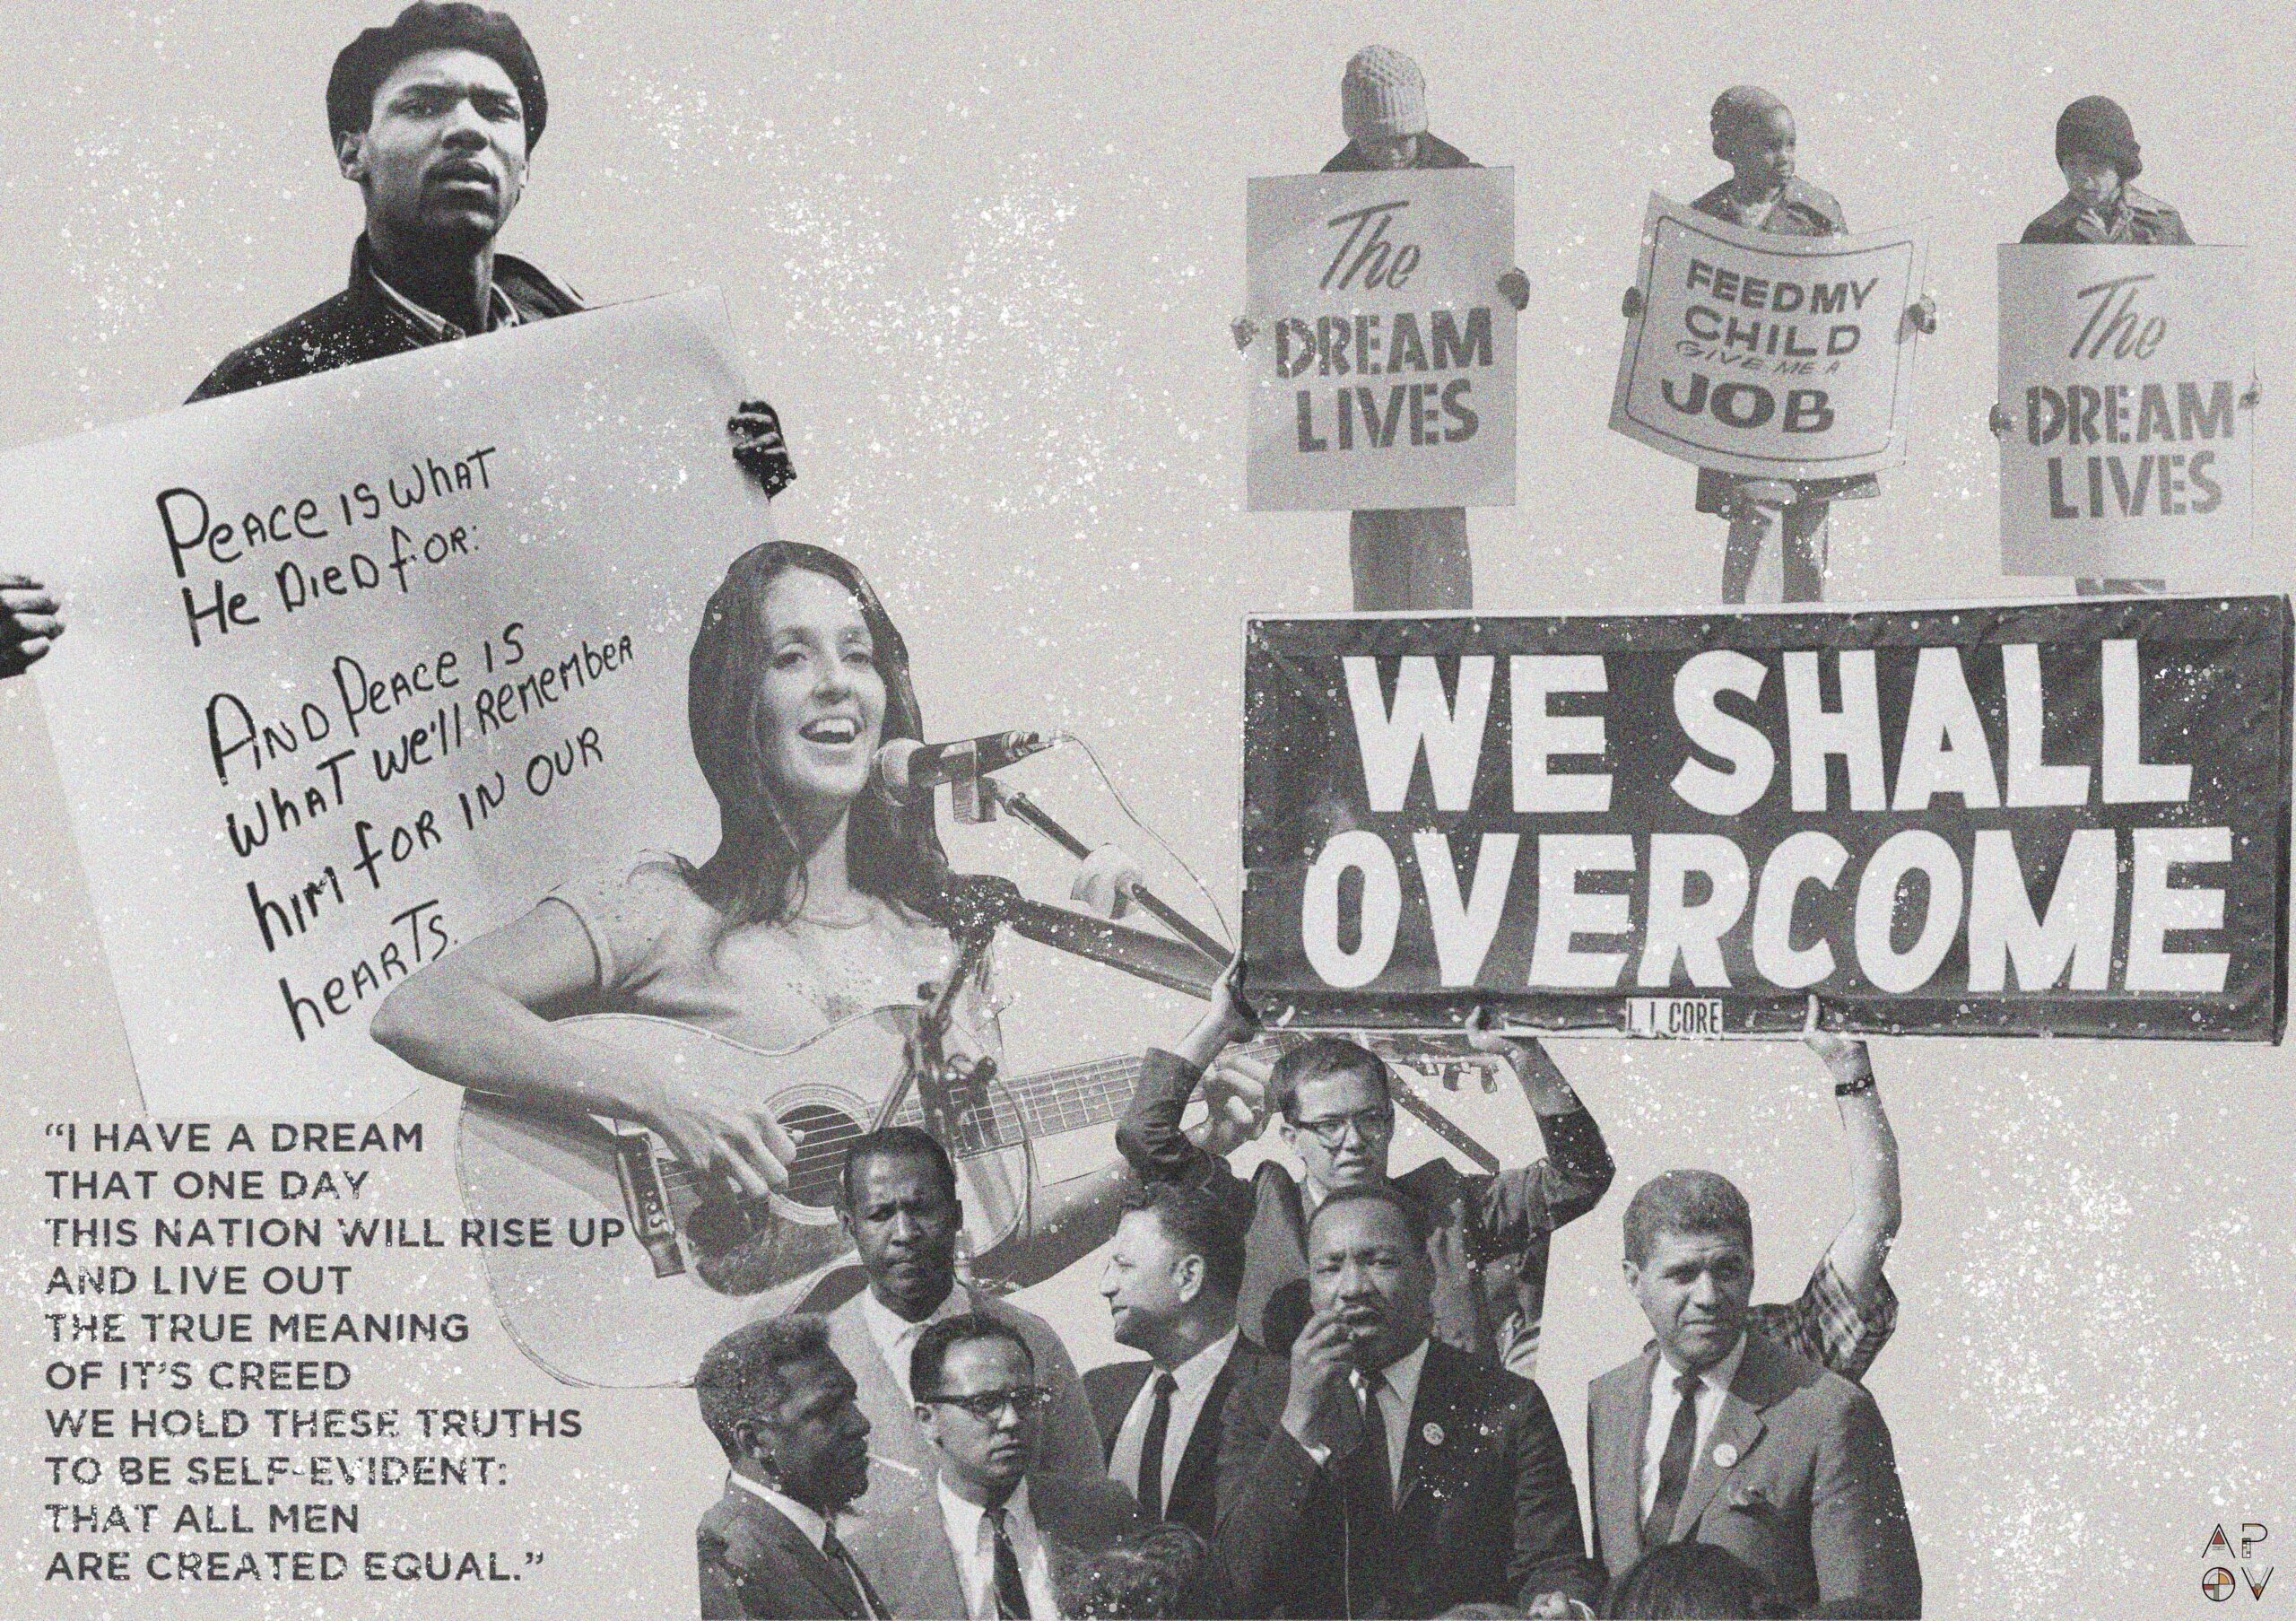 You are currently viewing “We Shall Overcome” – Ένα αφιέρωμα στην Ωδή στην Ελευθερία στην Αμερική